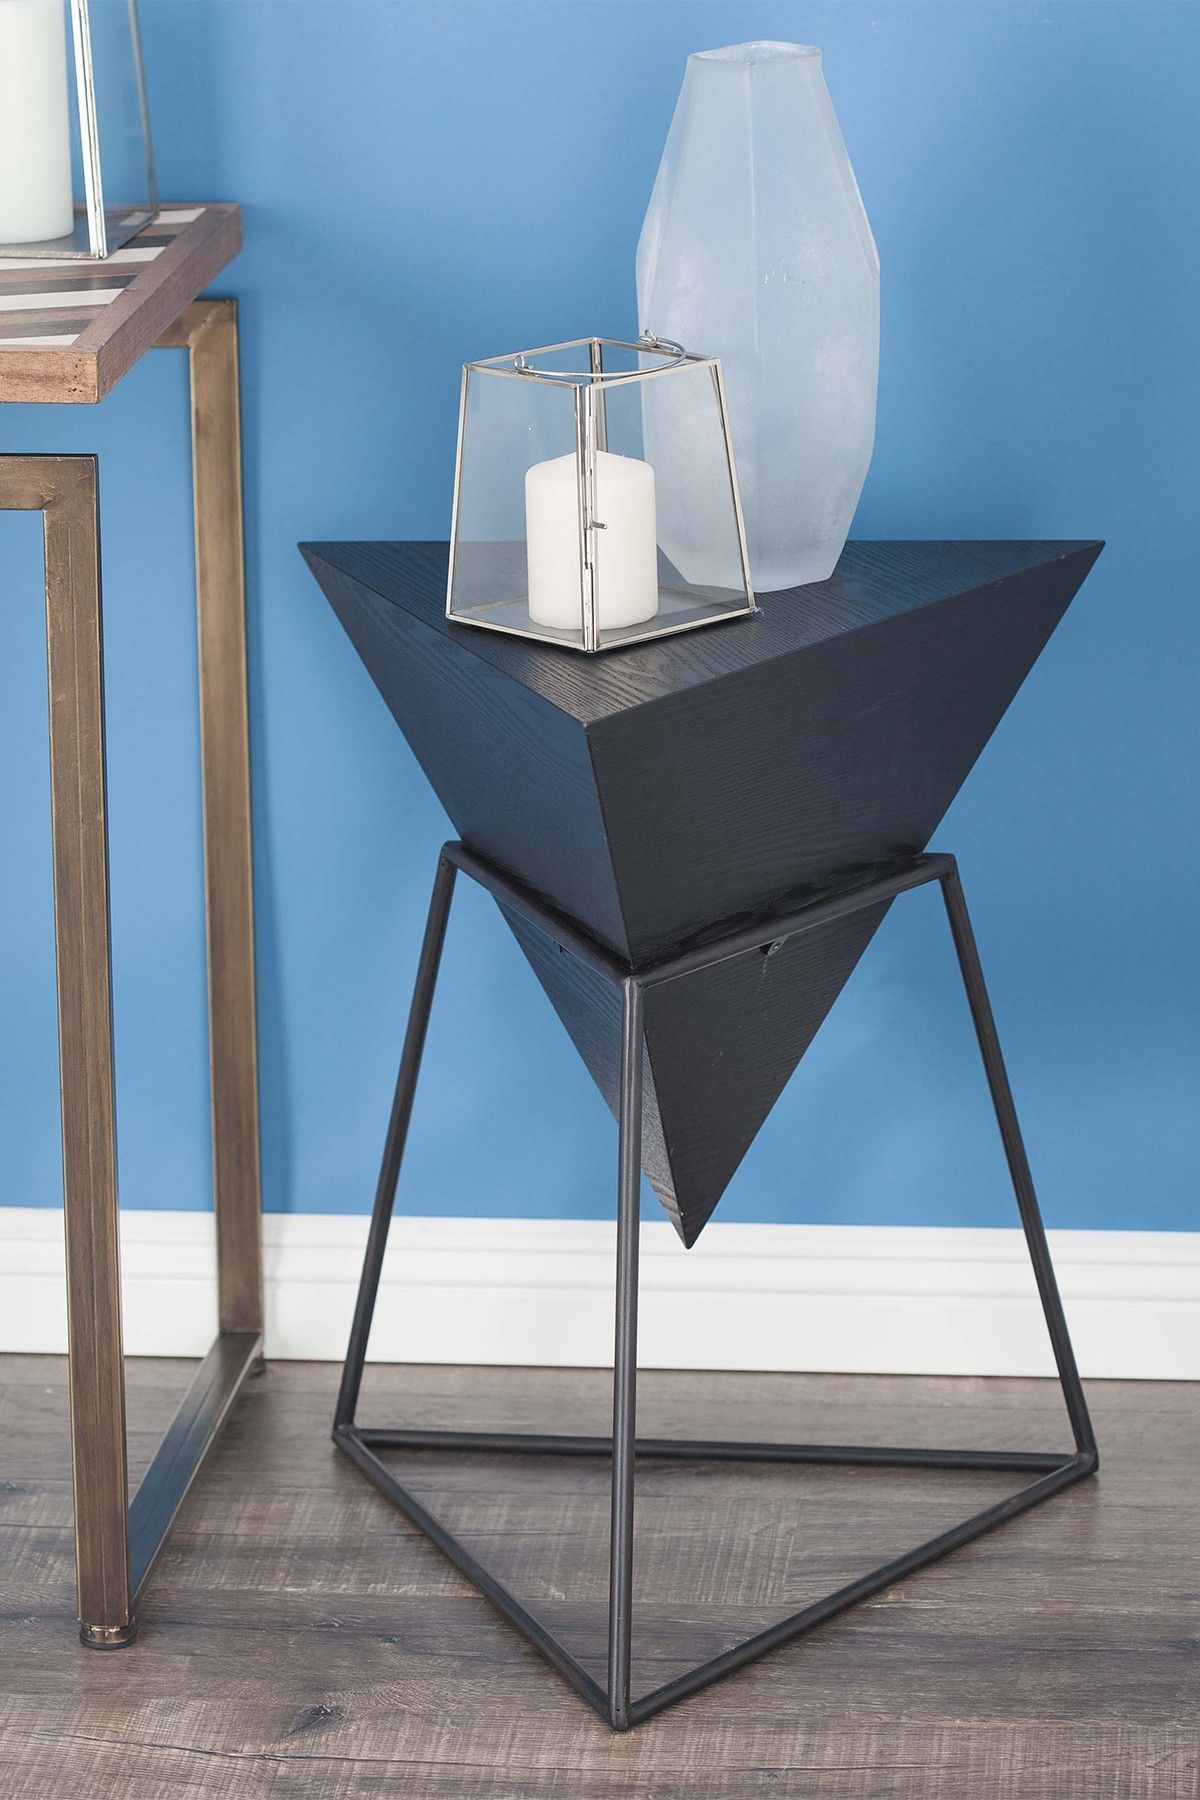 Pinpeyton Ward On Bedroom Ideas! | Triangle End Table, End Tables Intended For Triangular Console Tables (View 20 of 20)